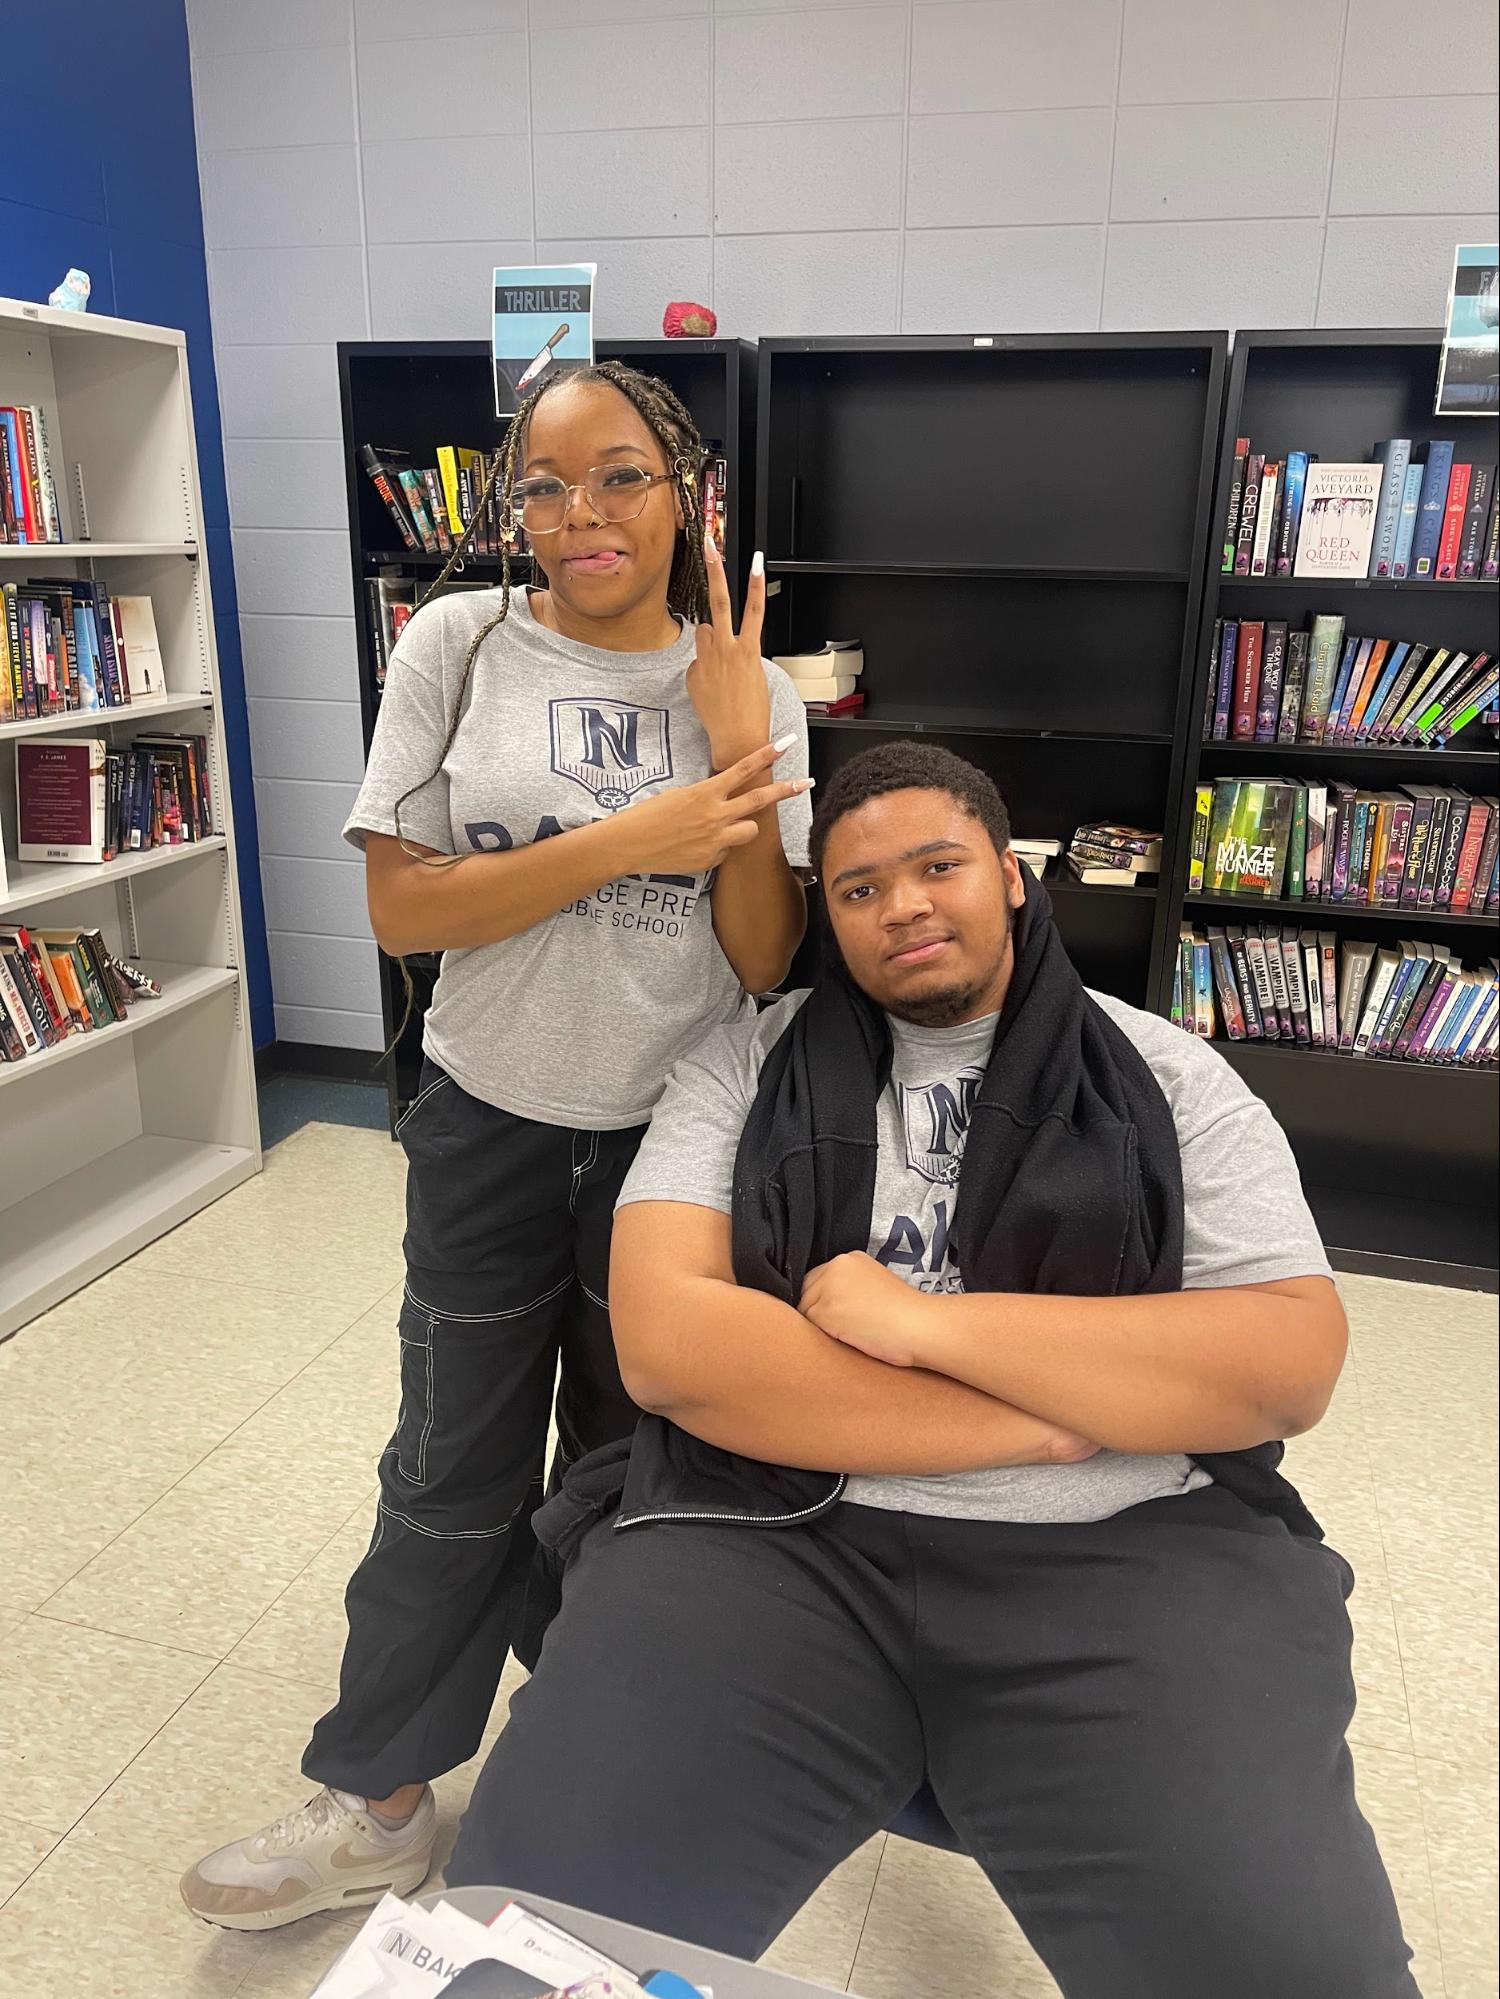 In this photo, Lion's Pride student mentor and Baker College Prep senior Antynece is standing behind her mentee, Bryan, who is sitting. They are both smiling and posing for the camera.